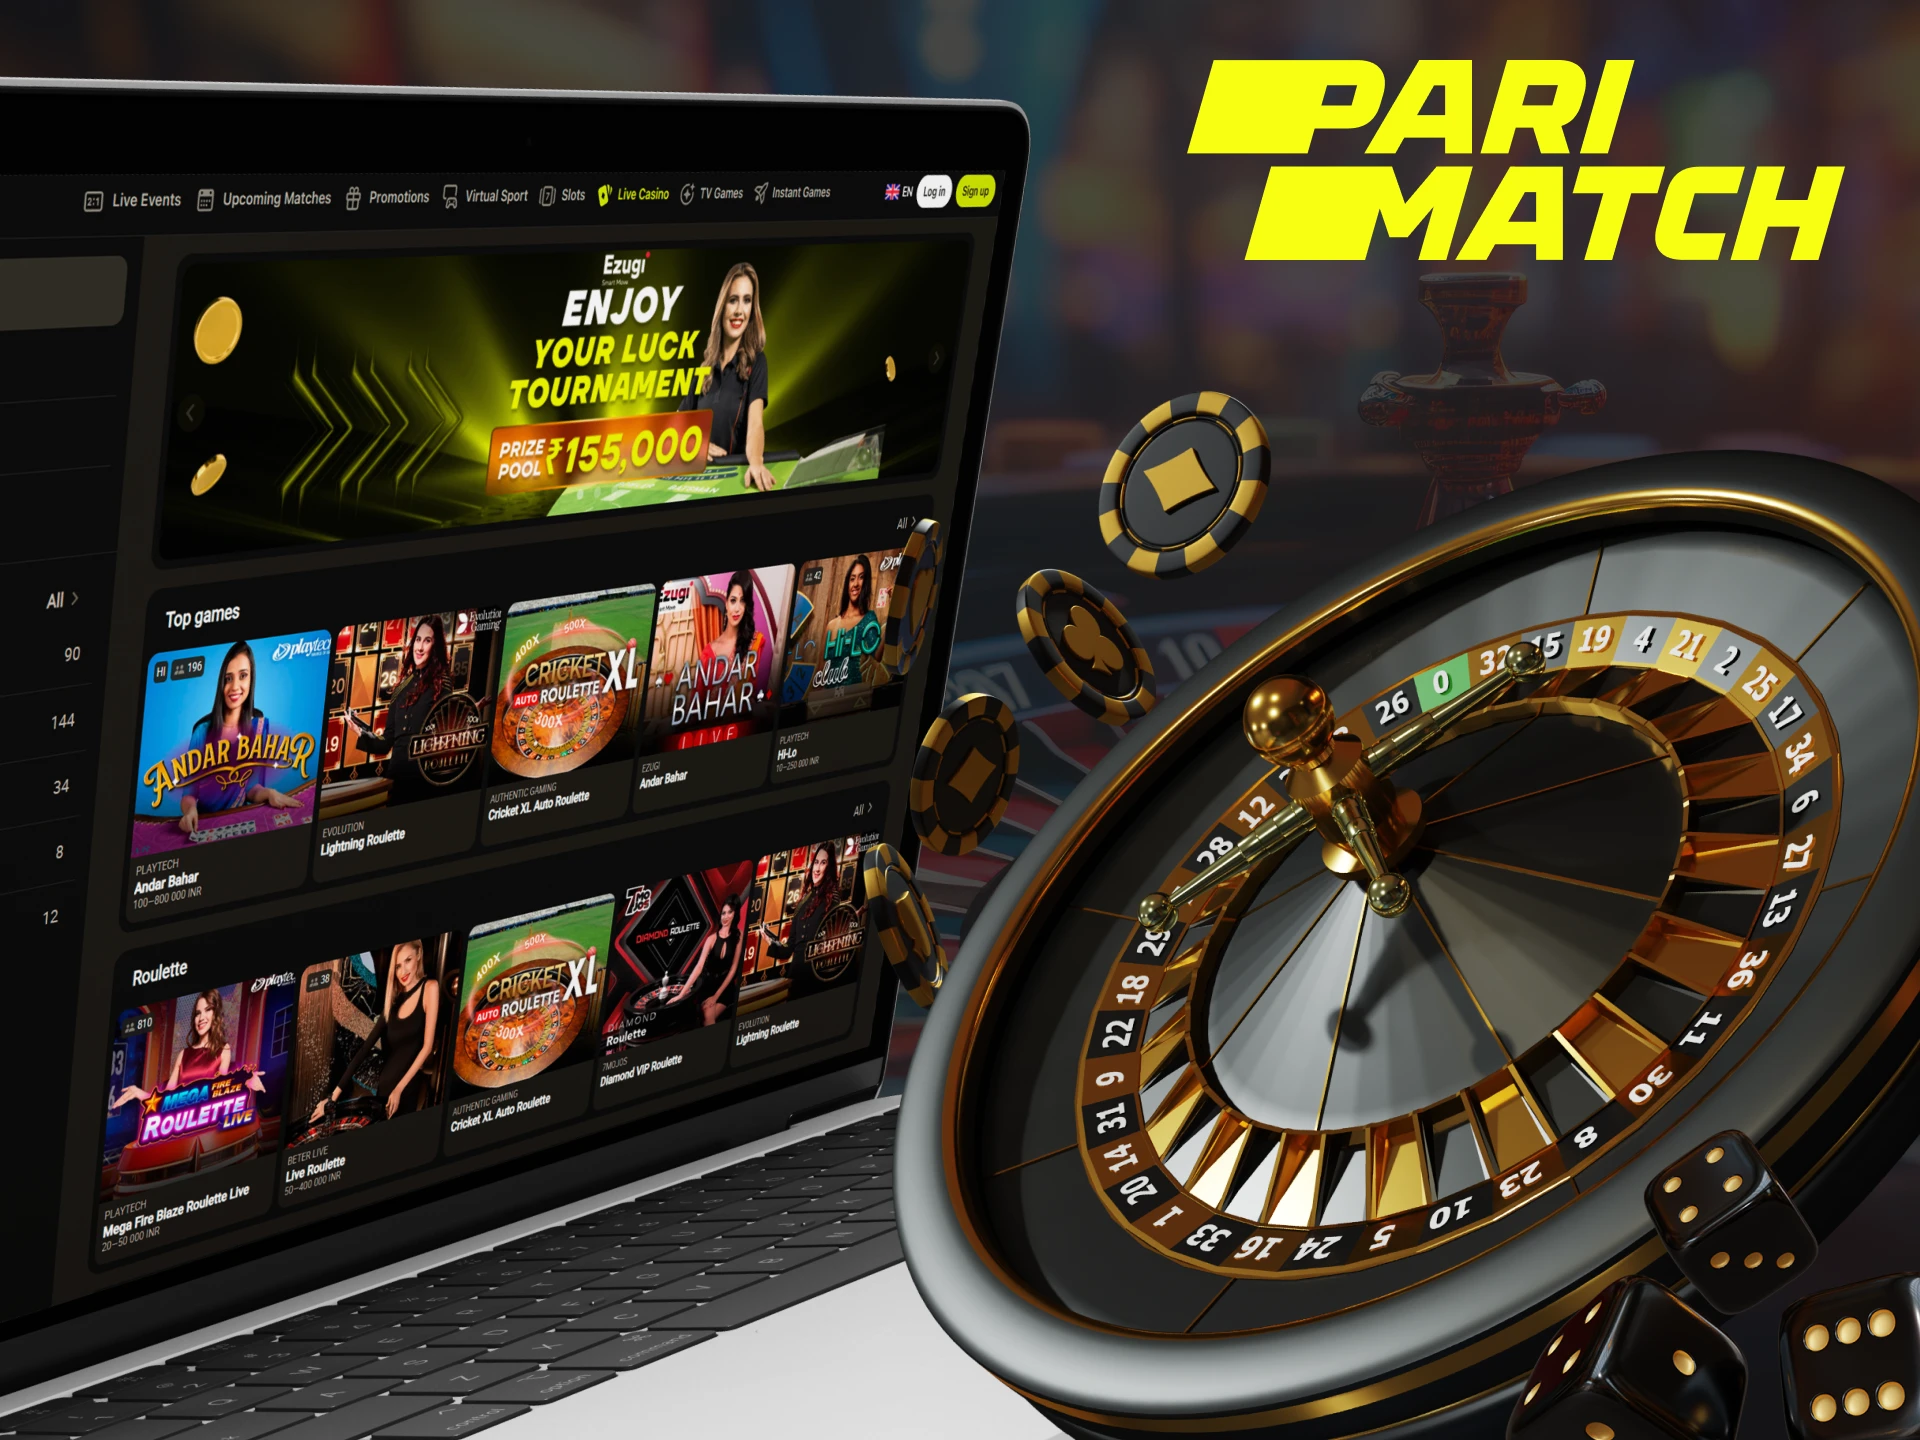 Parimatch has a variety of live casino games to bet on.